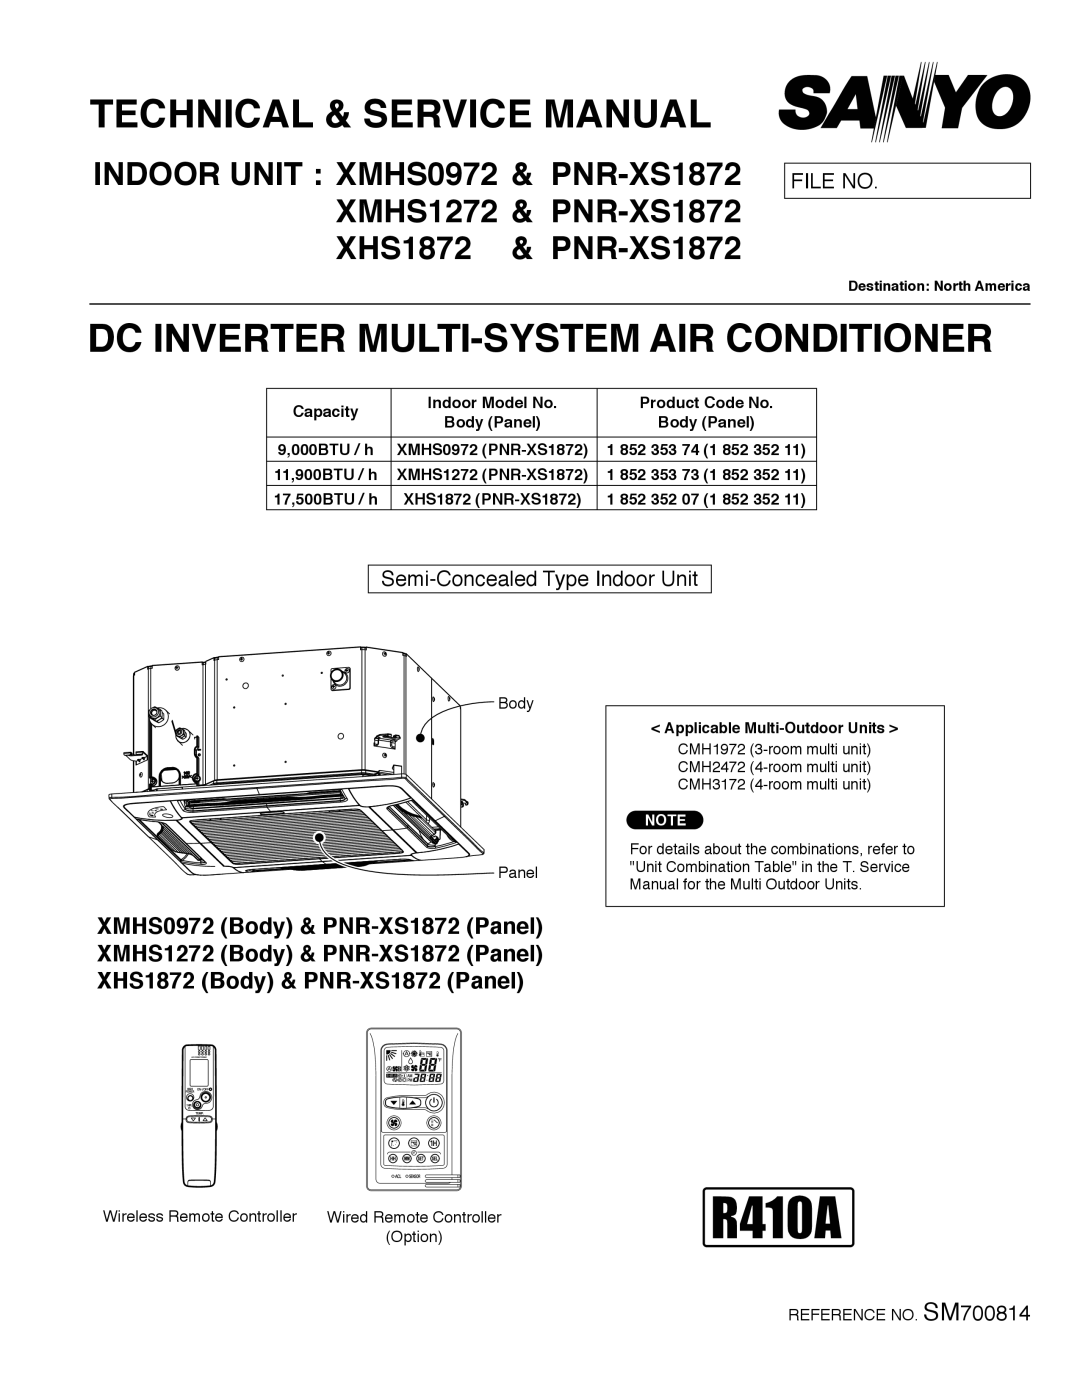 Sanyo XMHS1272 service manual Technical & Service Manual, Dc Inverter Multi-Systemair Conditioner, File No, Capacity 